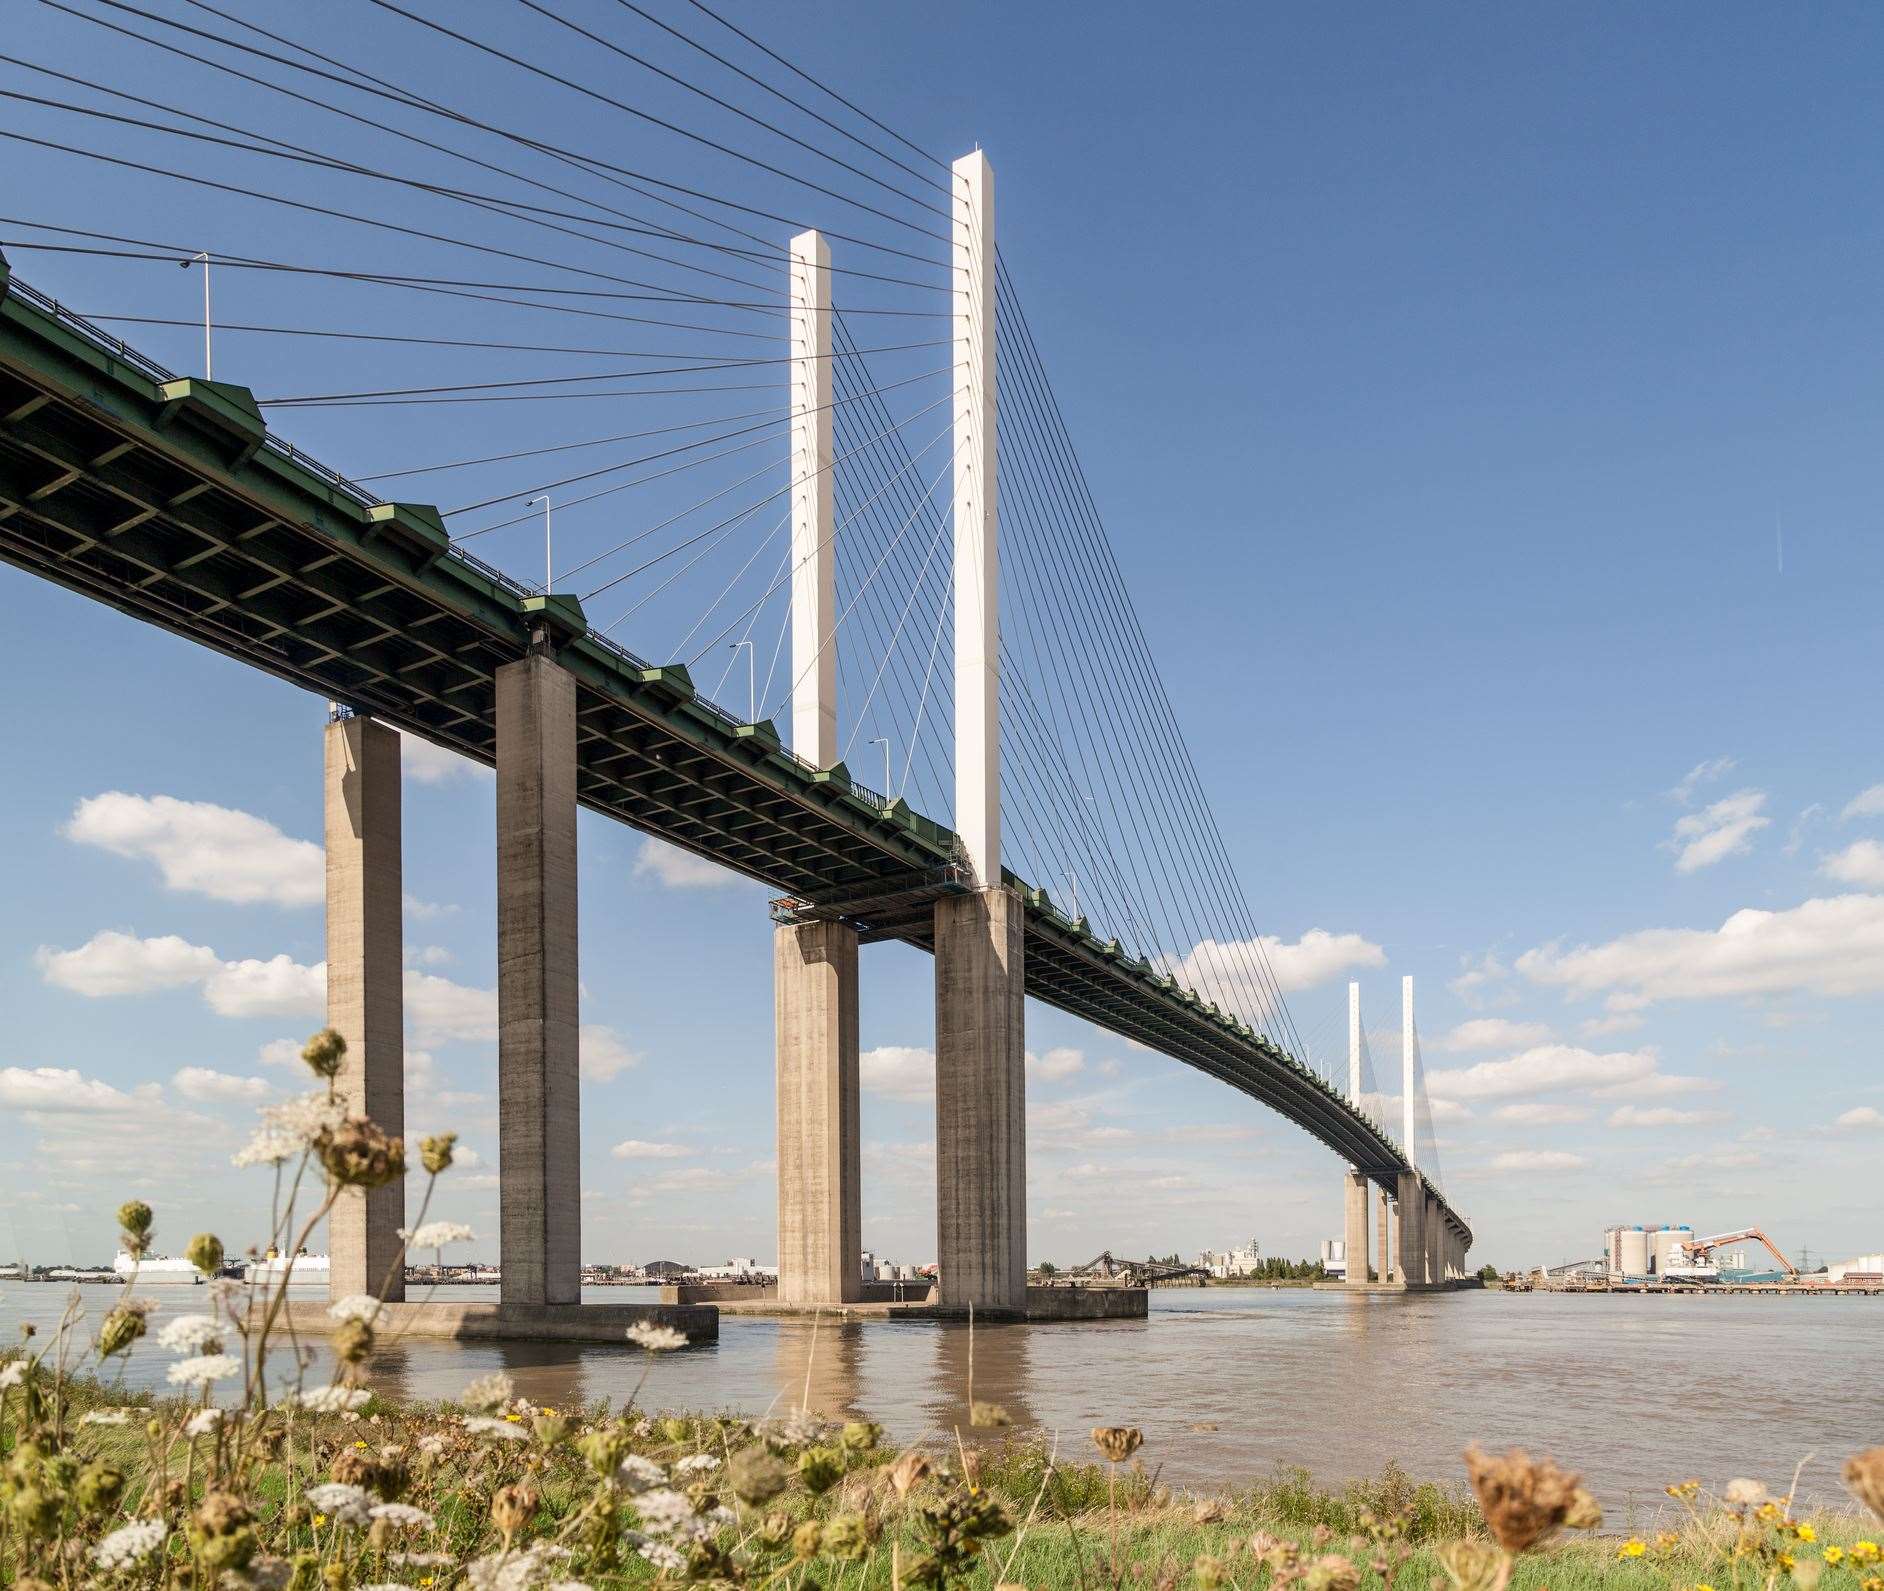 The new Lower Thames Crossing is aimed to ease congestion at the Dartford Crossing